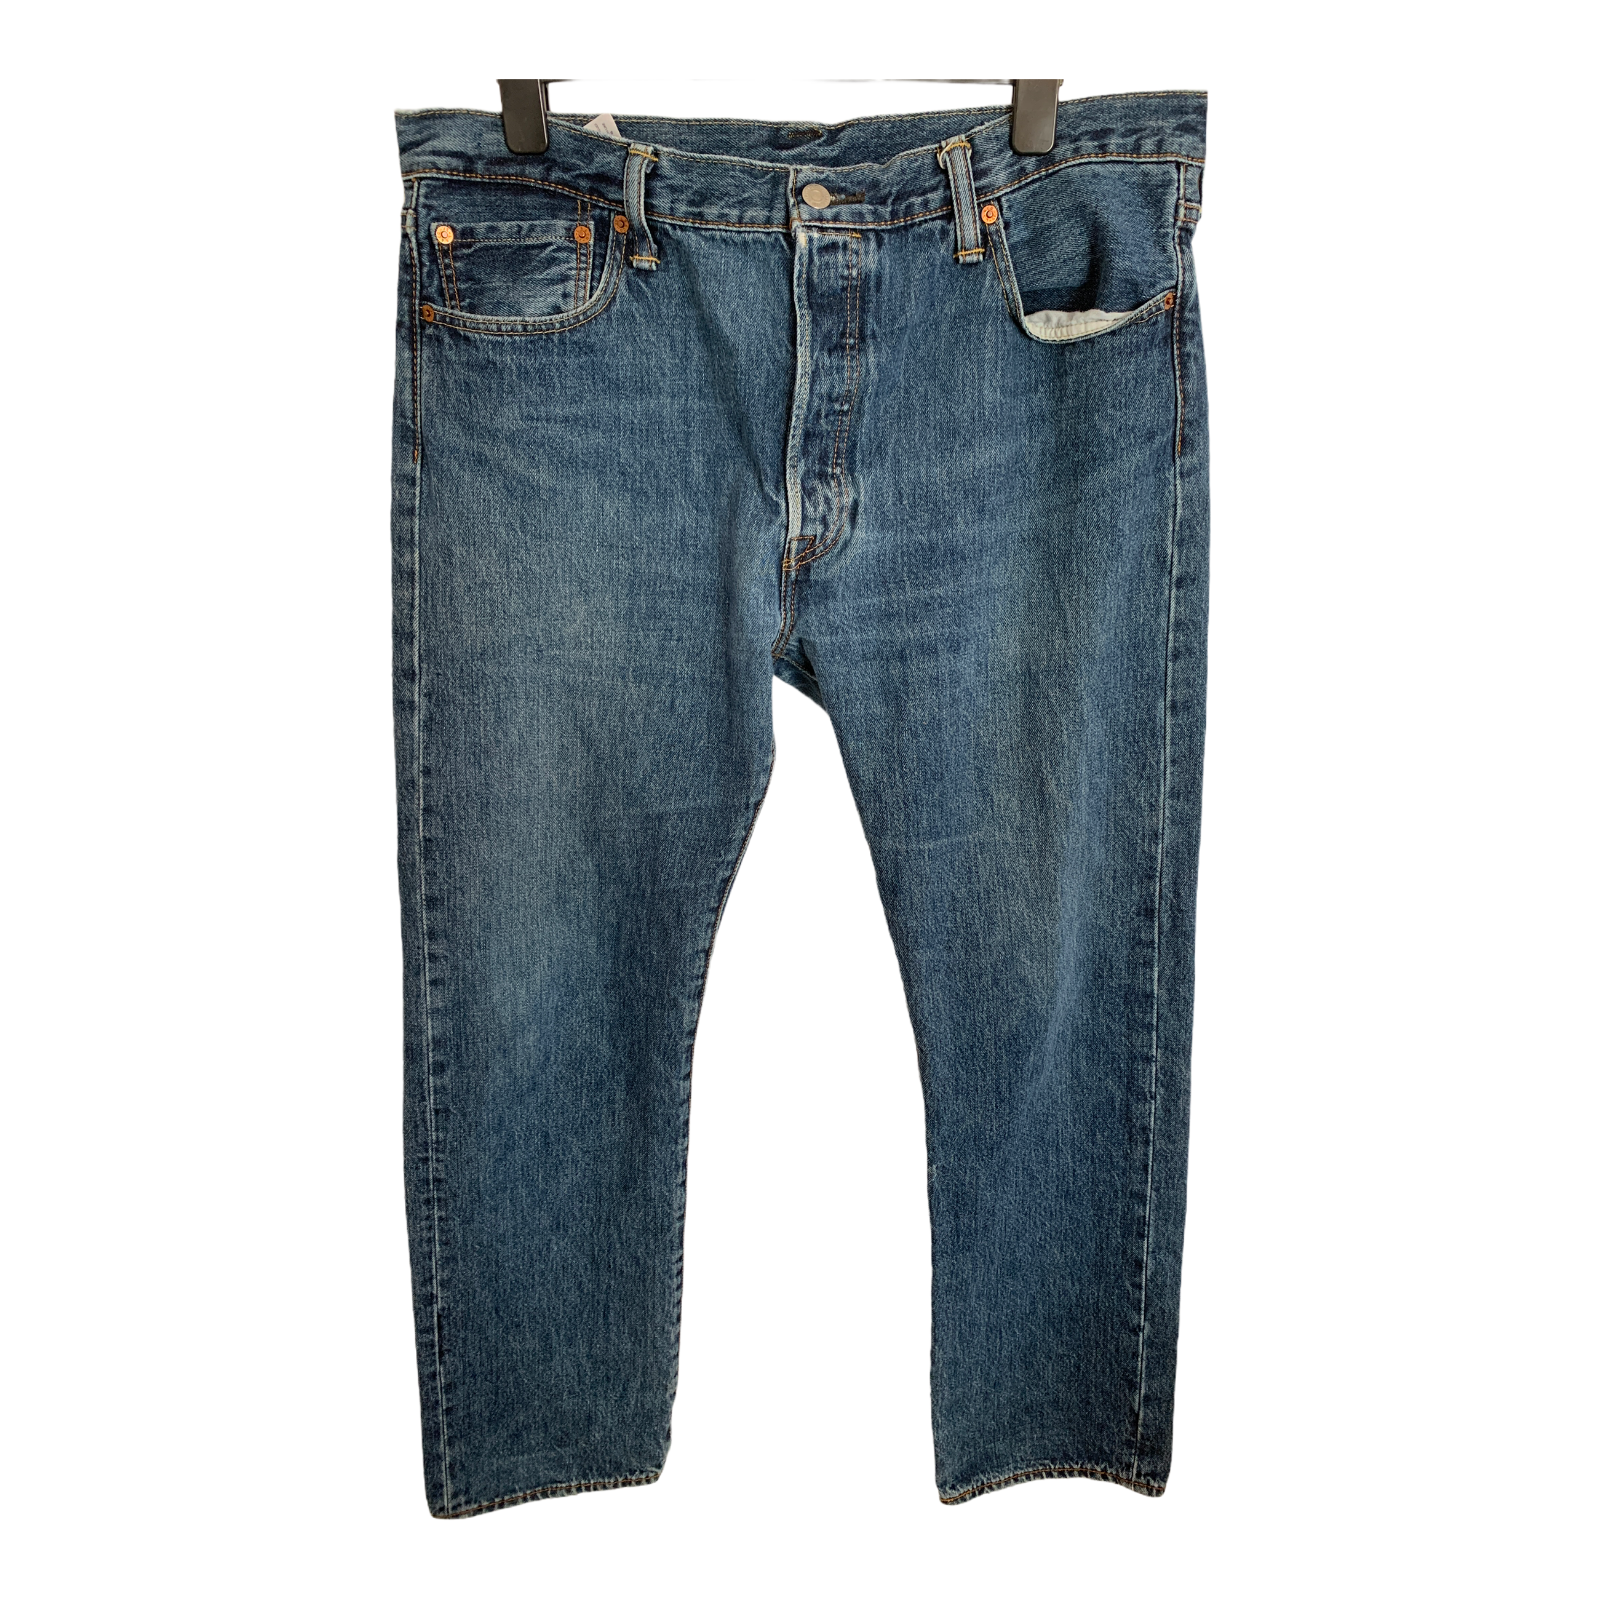 skrive et brev champion ligning Levi Strauss and Co 501 Mens Blue Jeans Uk Size 36 Inch Waist - Spare parts